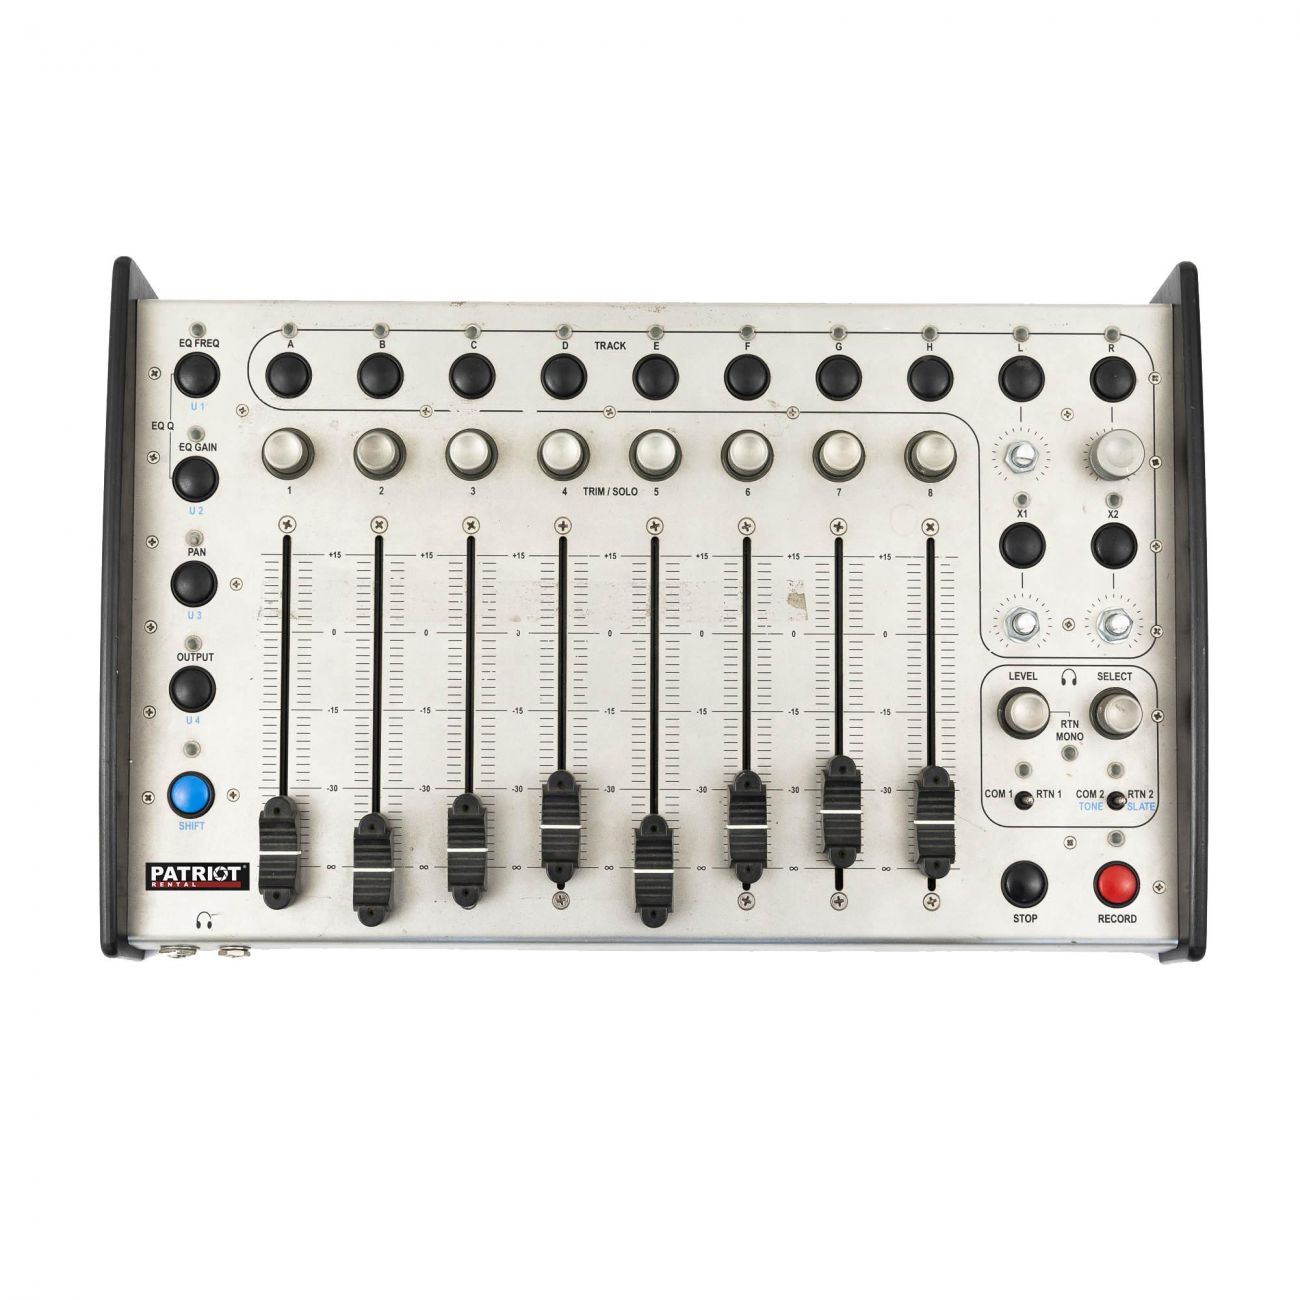 Sound Devices CL-9 Linear Fader Controller for 7-Series of Recorders